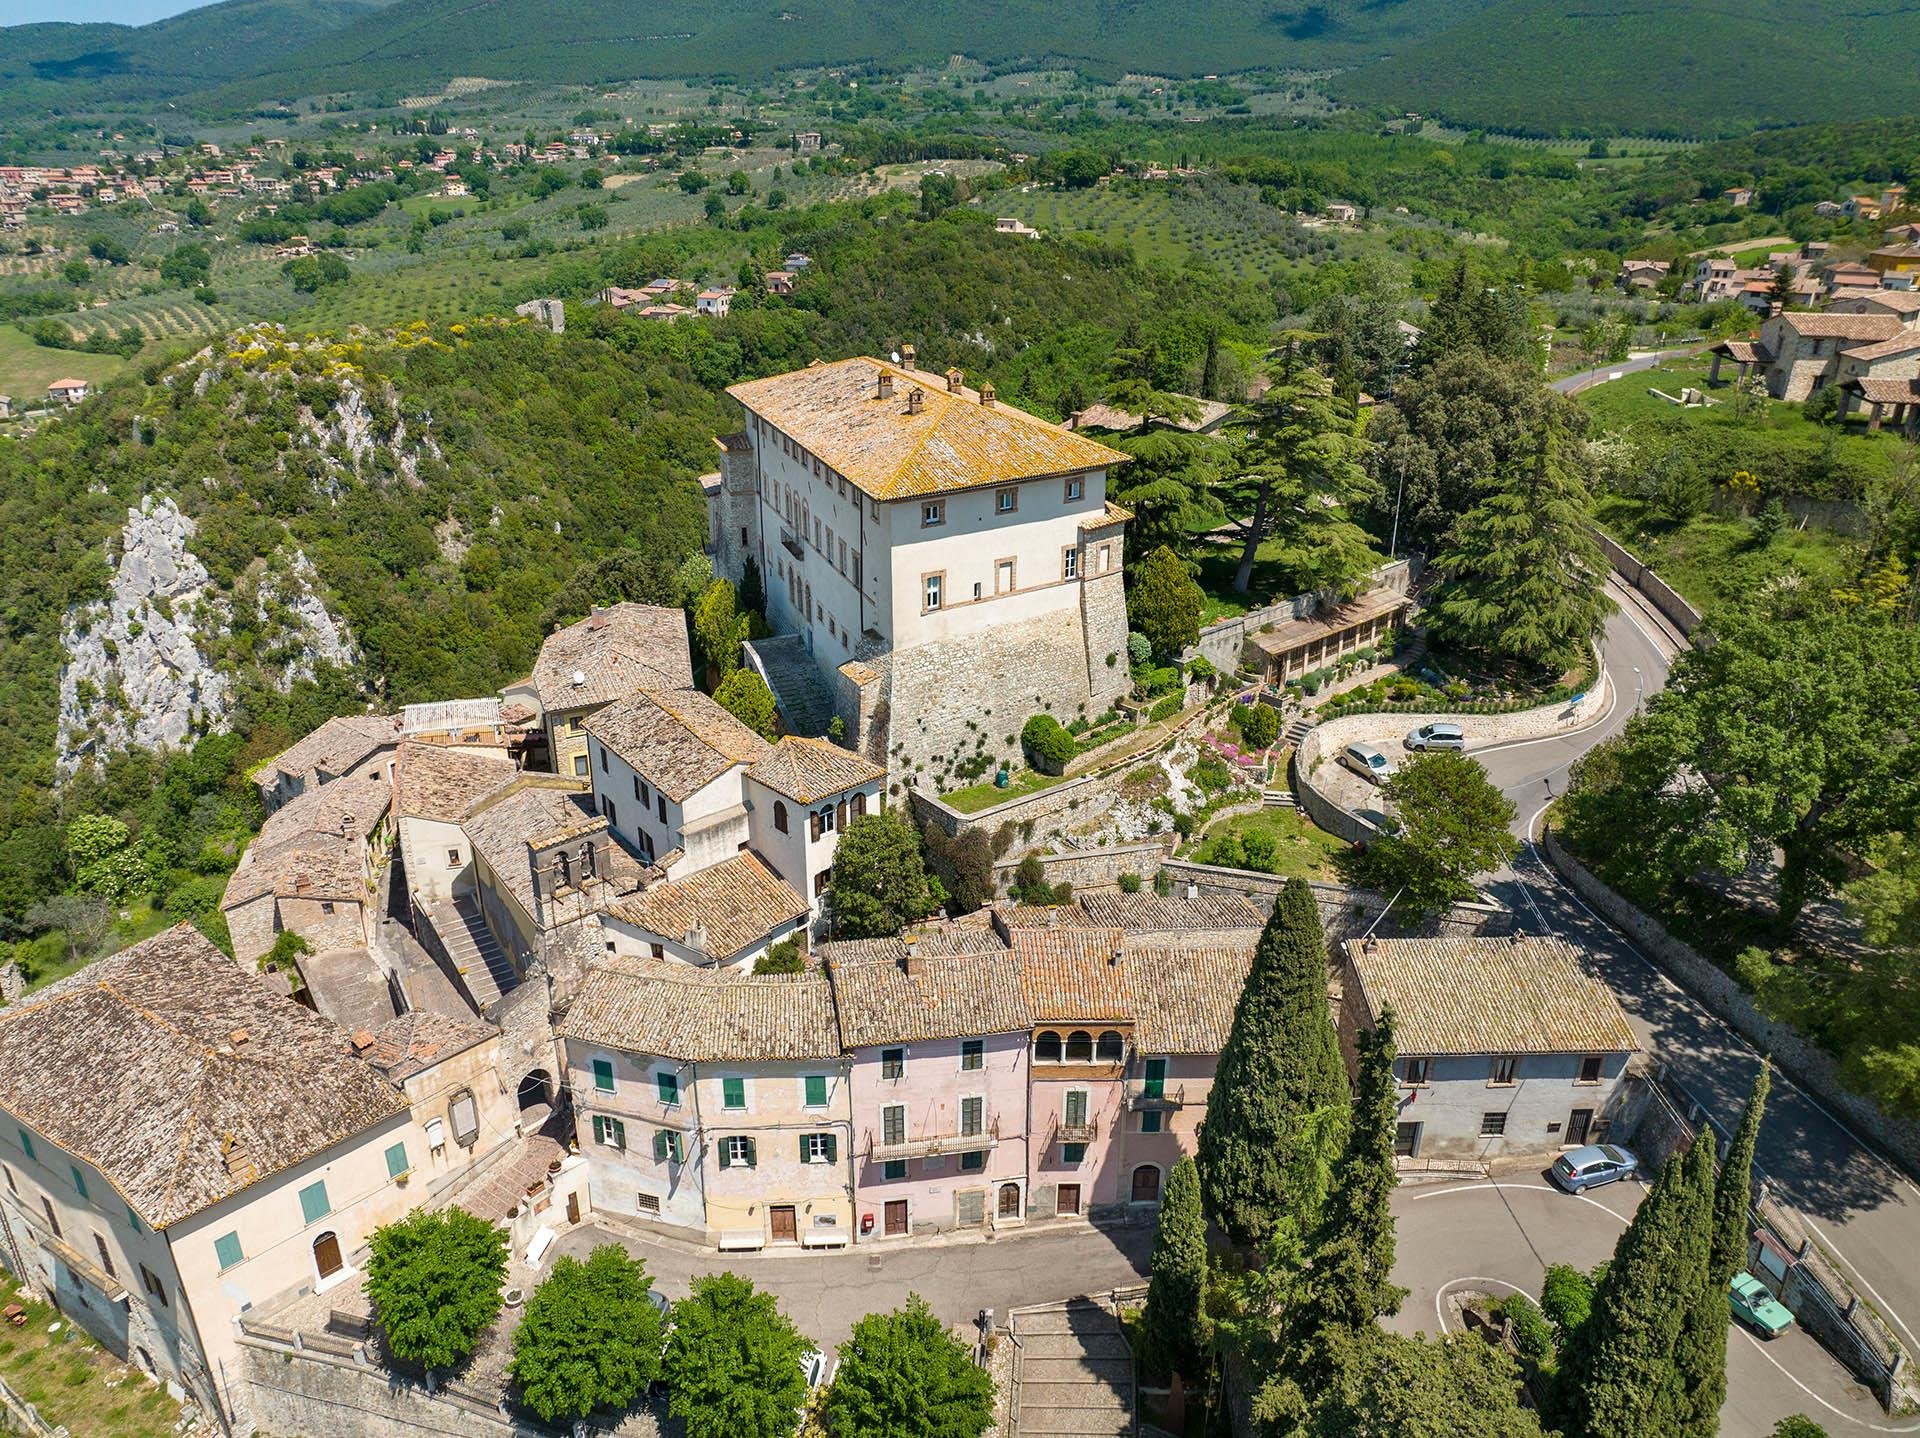 Francis York Historic Palazzo For Sale in Umbria, Italy Set in Private Park 5.jpg